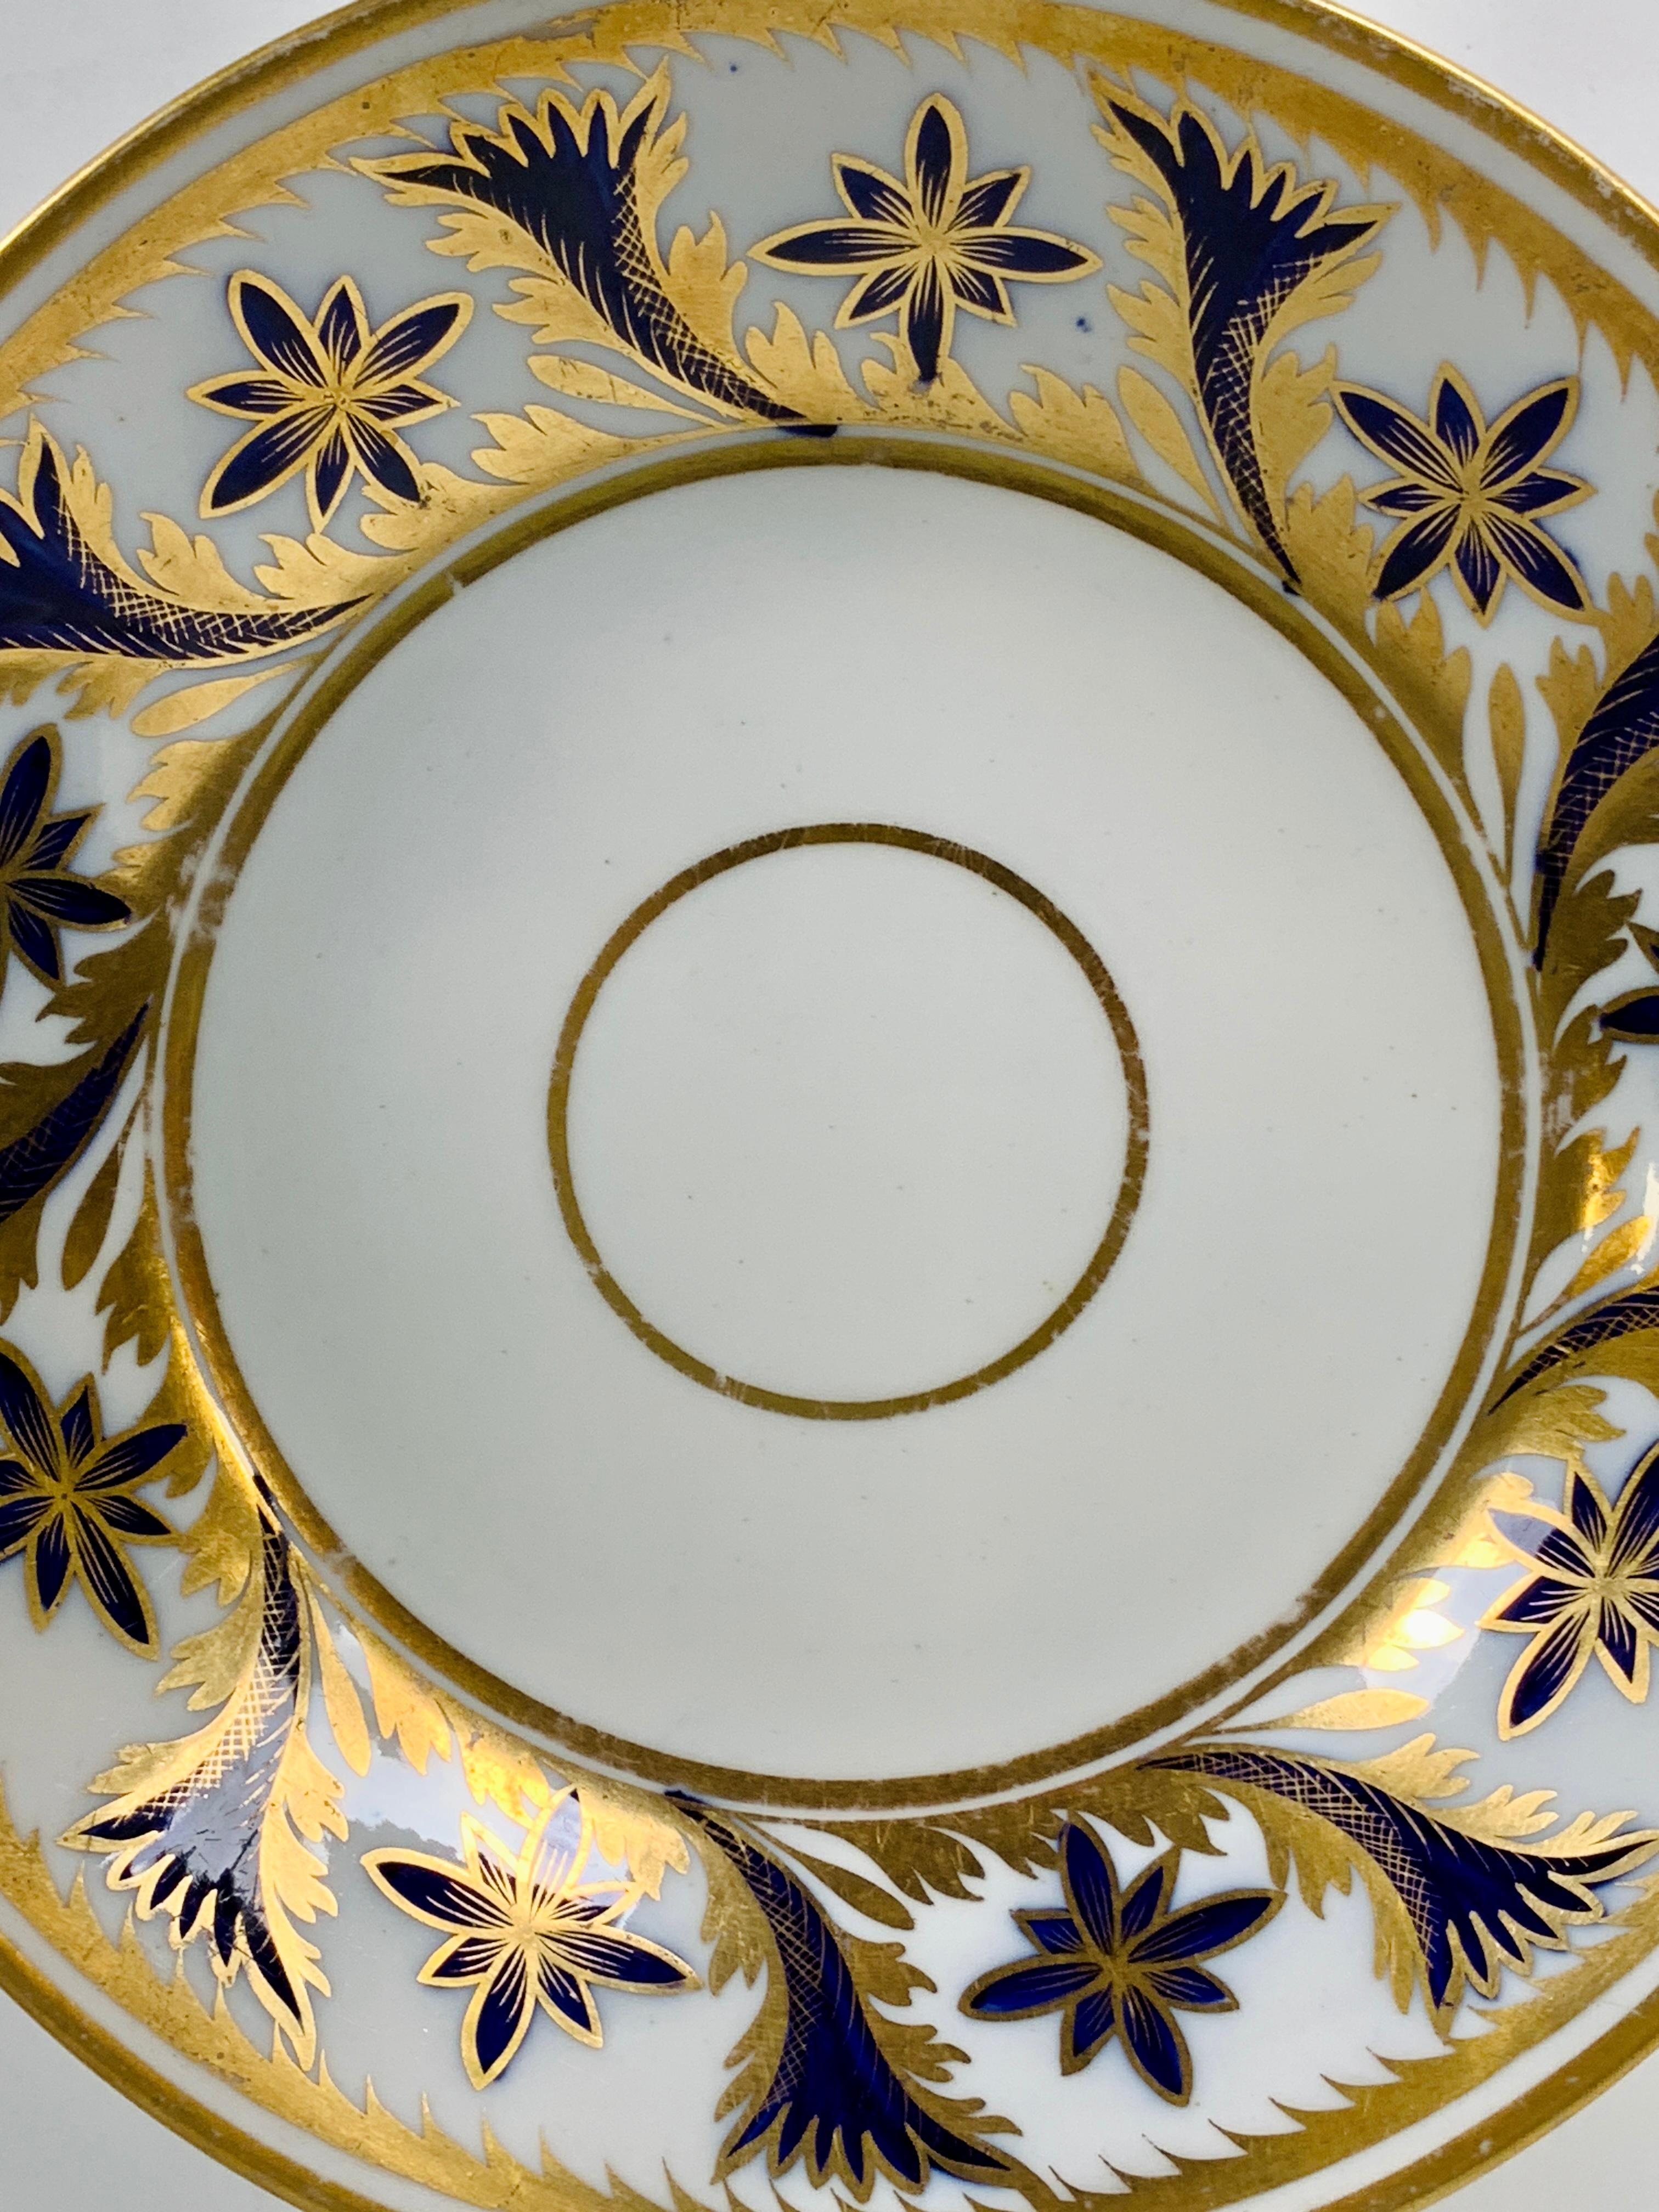 Regency From the Collection of Mario Buatta an English Dish with Blue & Gold Decoration For Sale